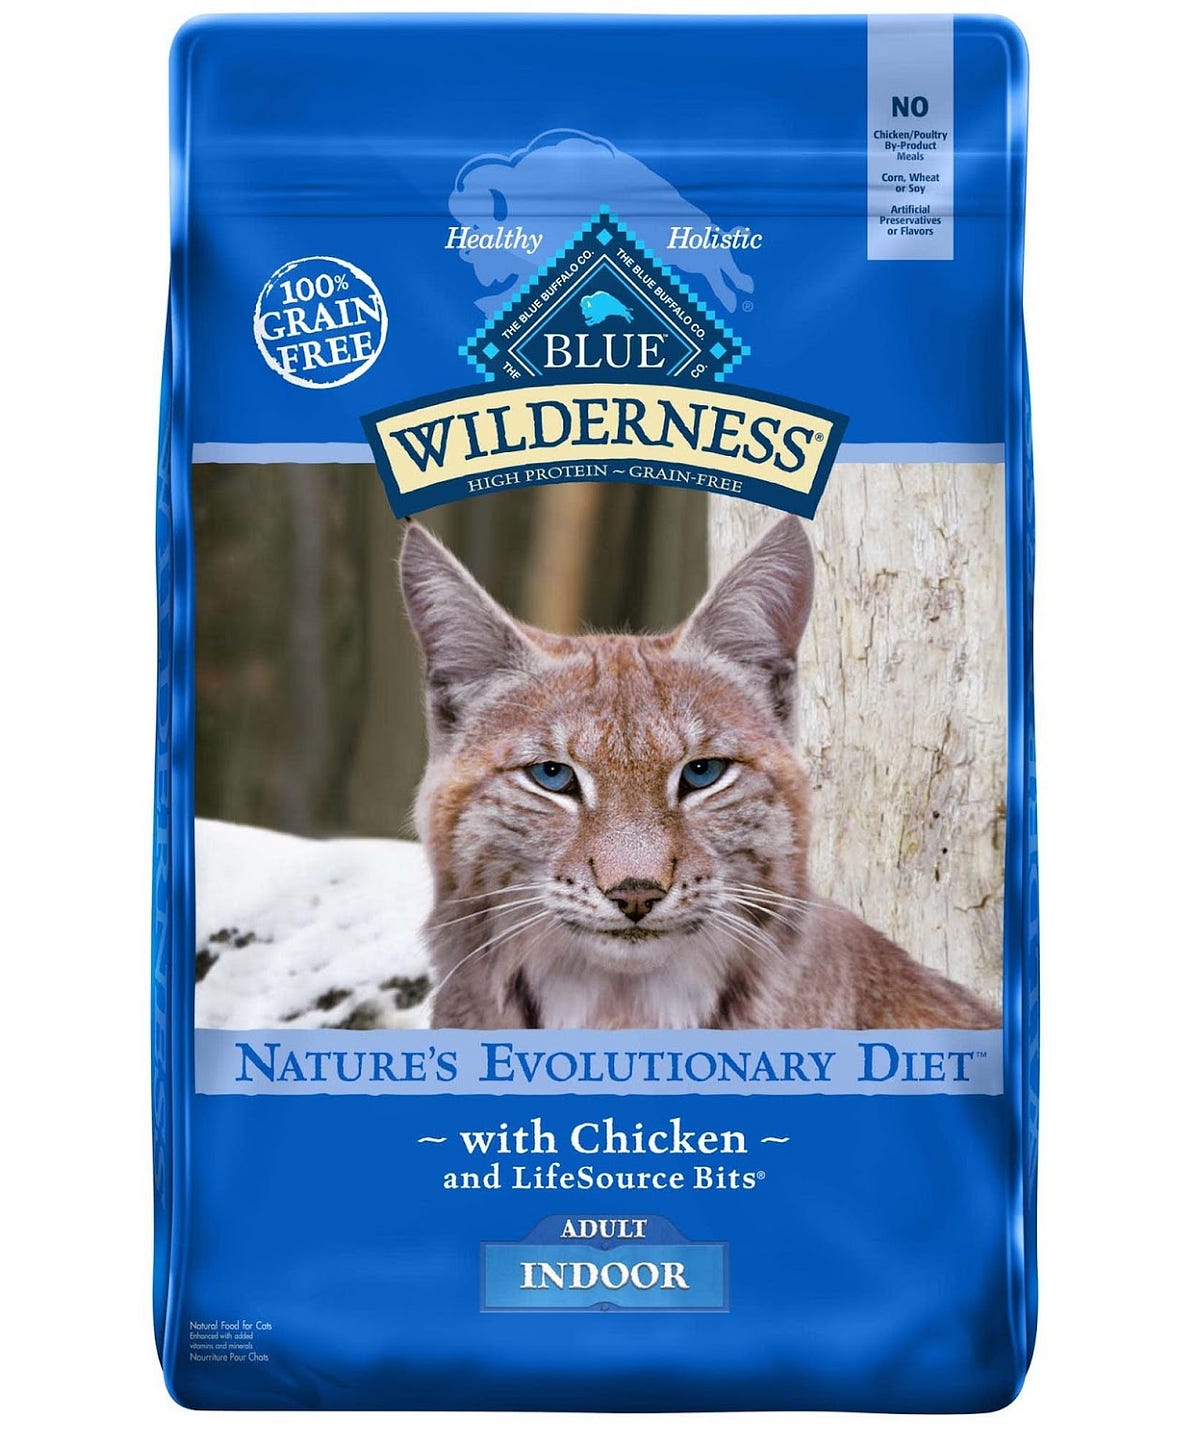 CAT FOOD BRANDS 2020. THE BEST DRY FOOD FOR CATS AND ...